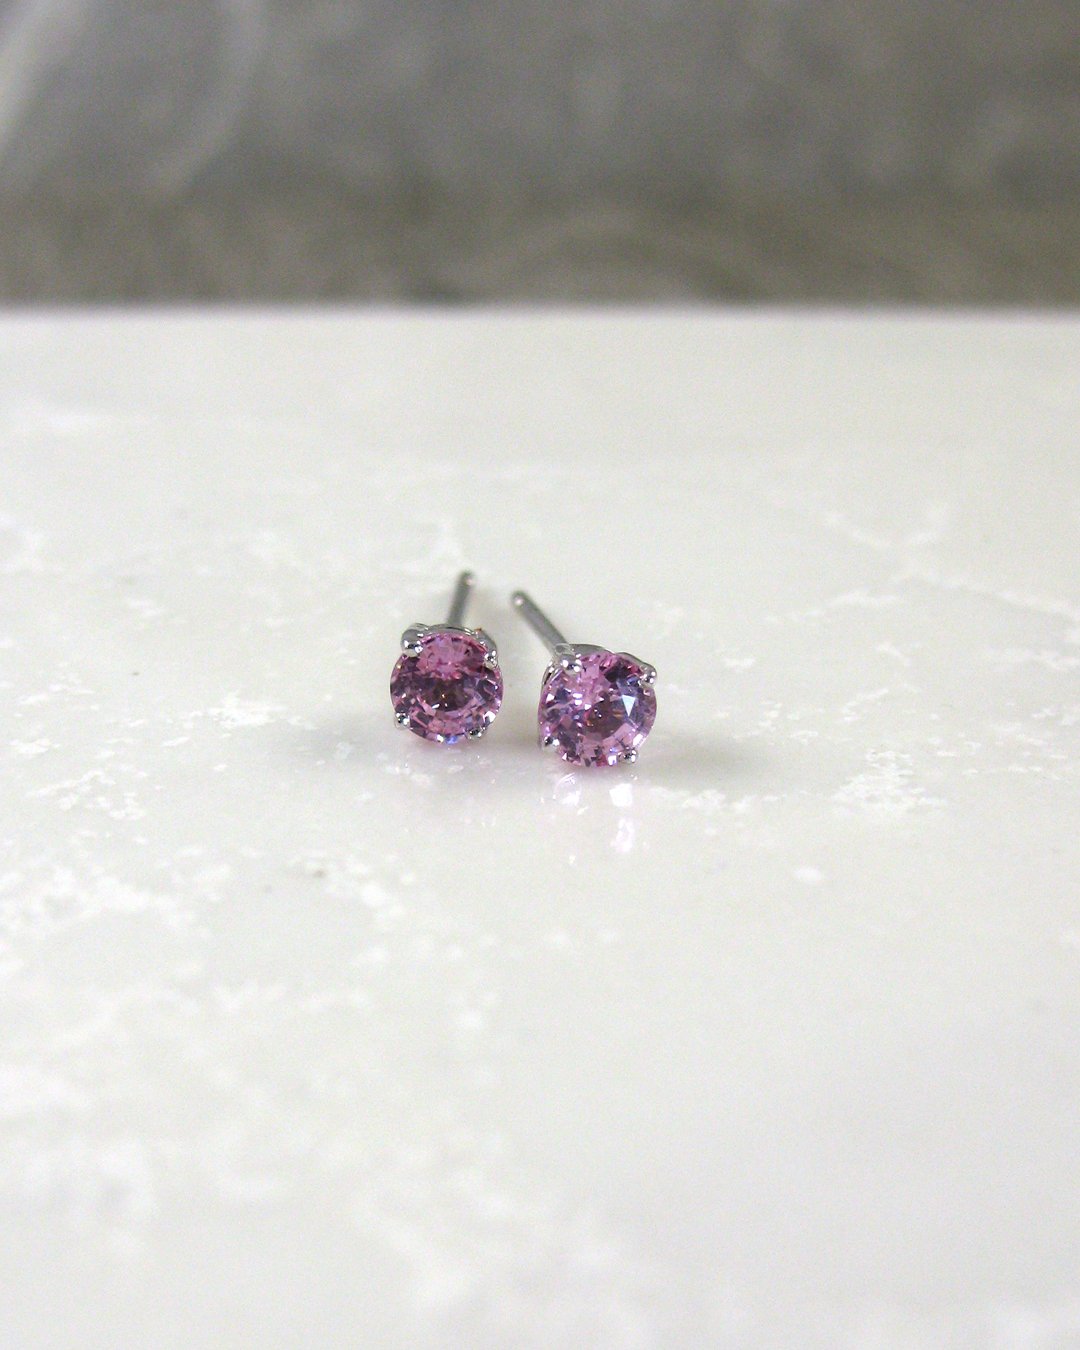 A stunning pair of pink sapphire stud earrings